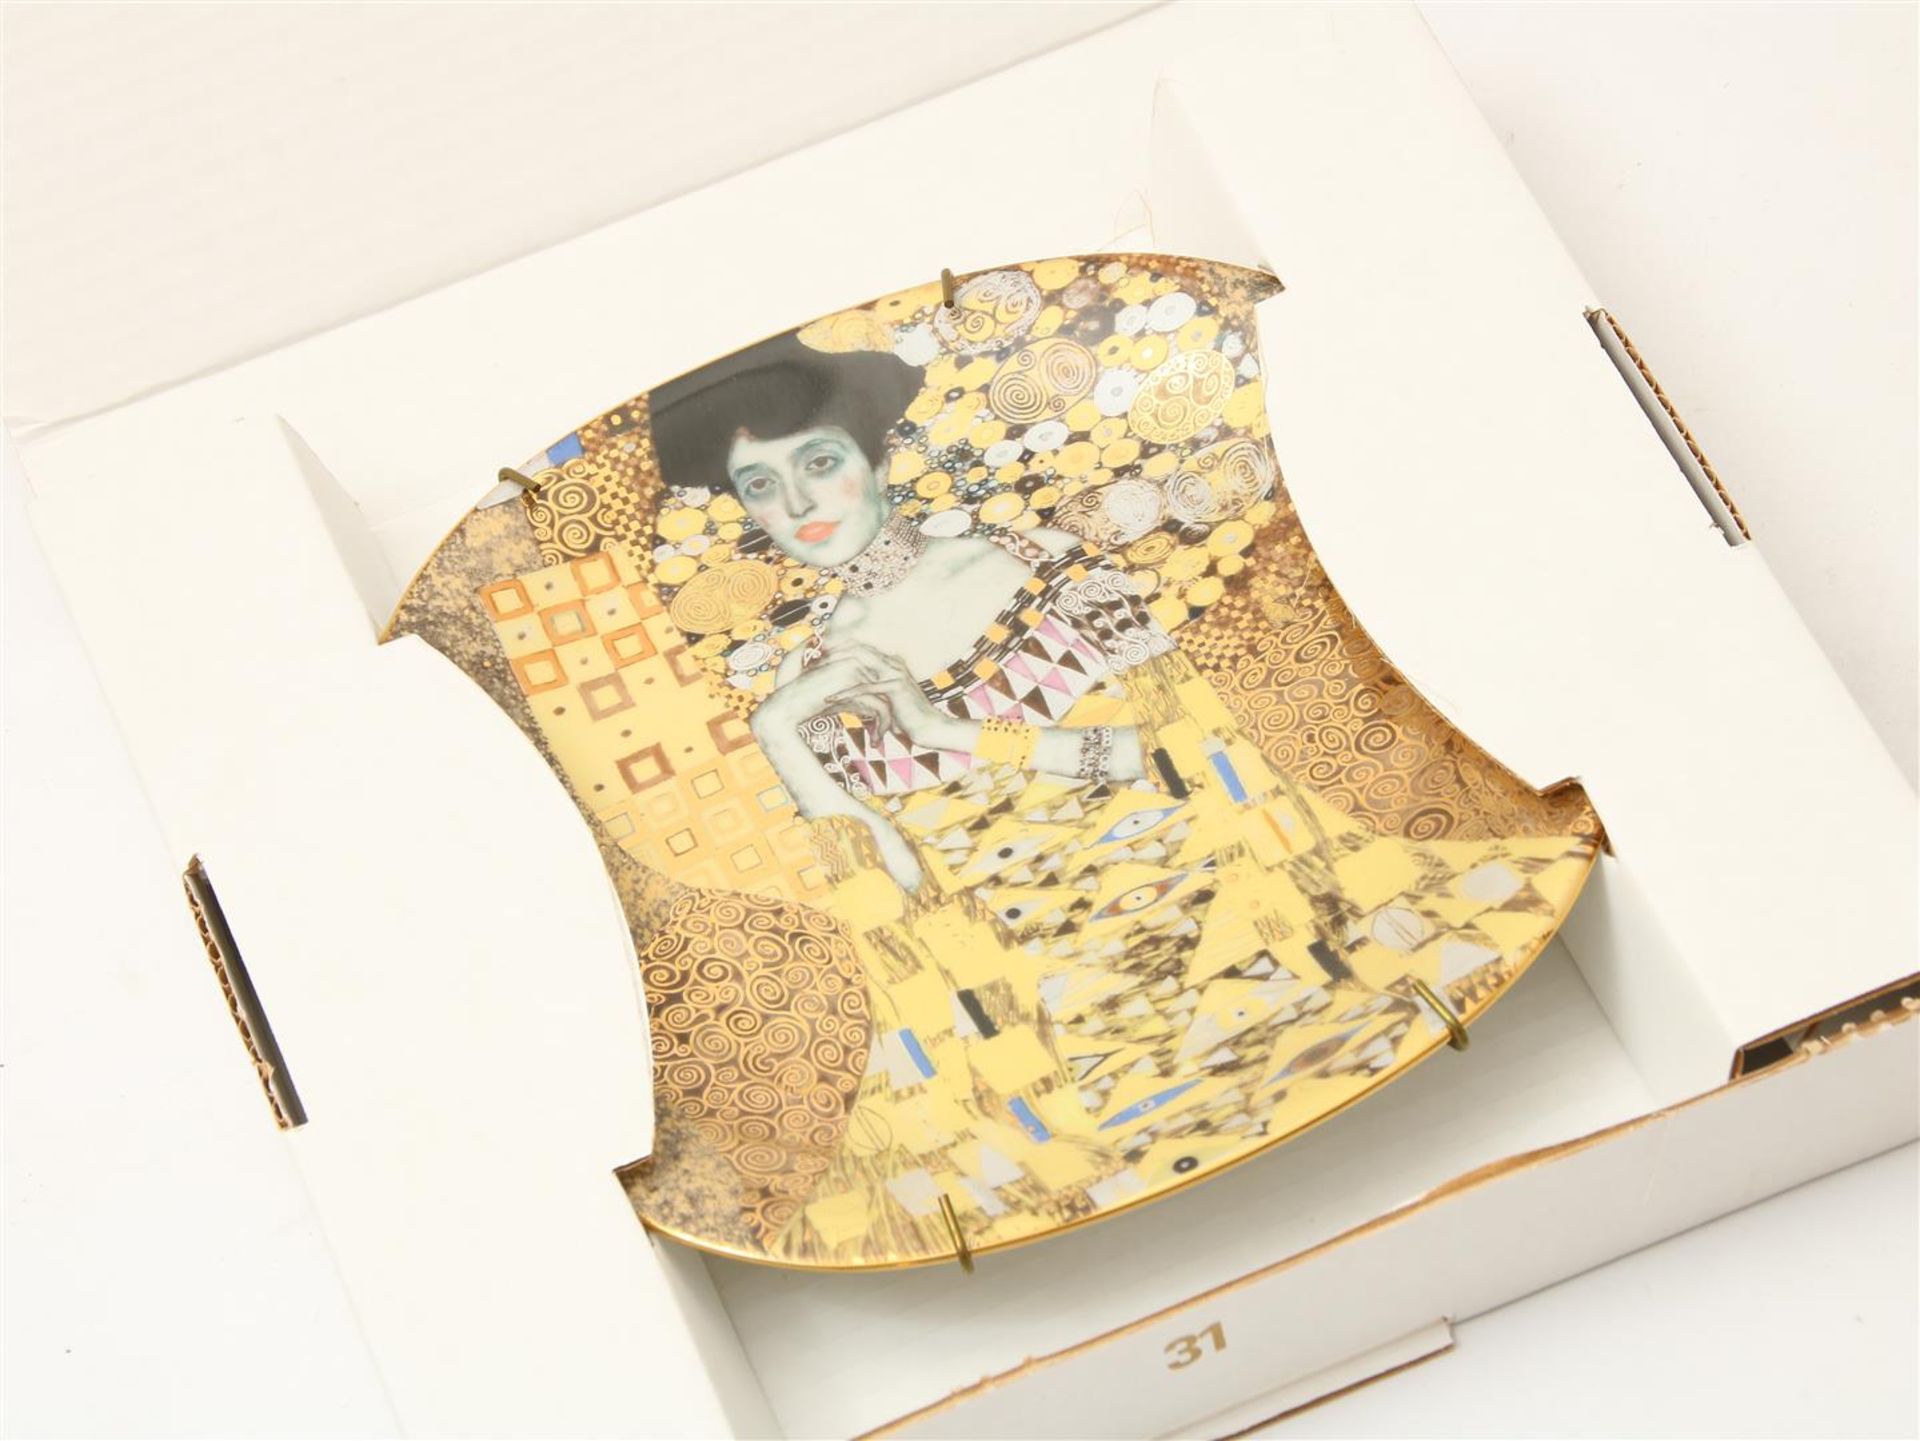 Series of 7 plates with images of the painter Gustav Klimt, Lilien porzellan, "Phantastic - Image 8 of 18